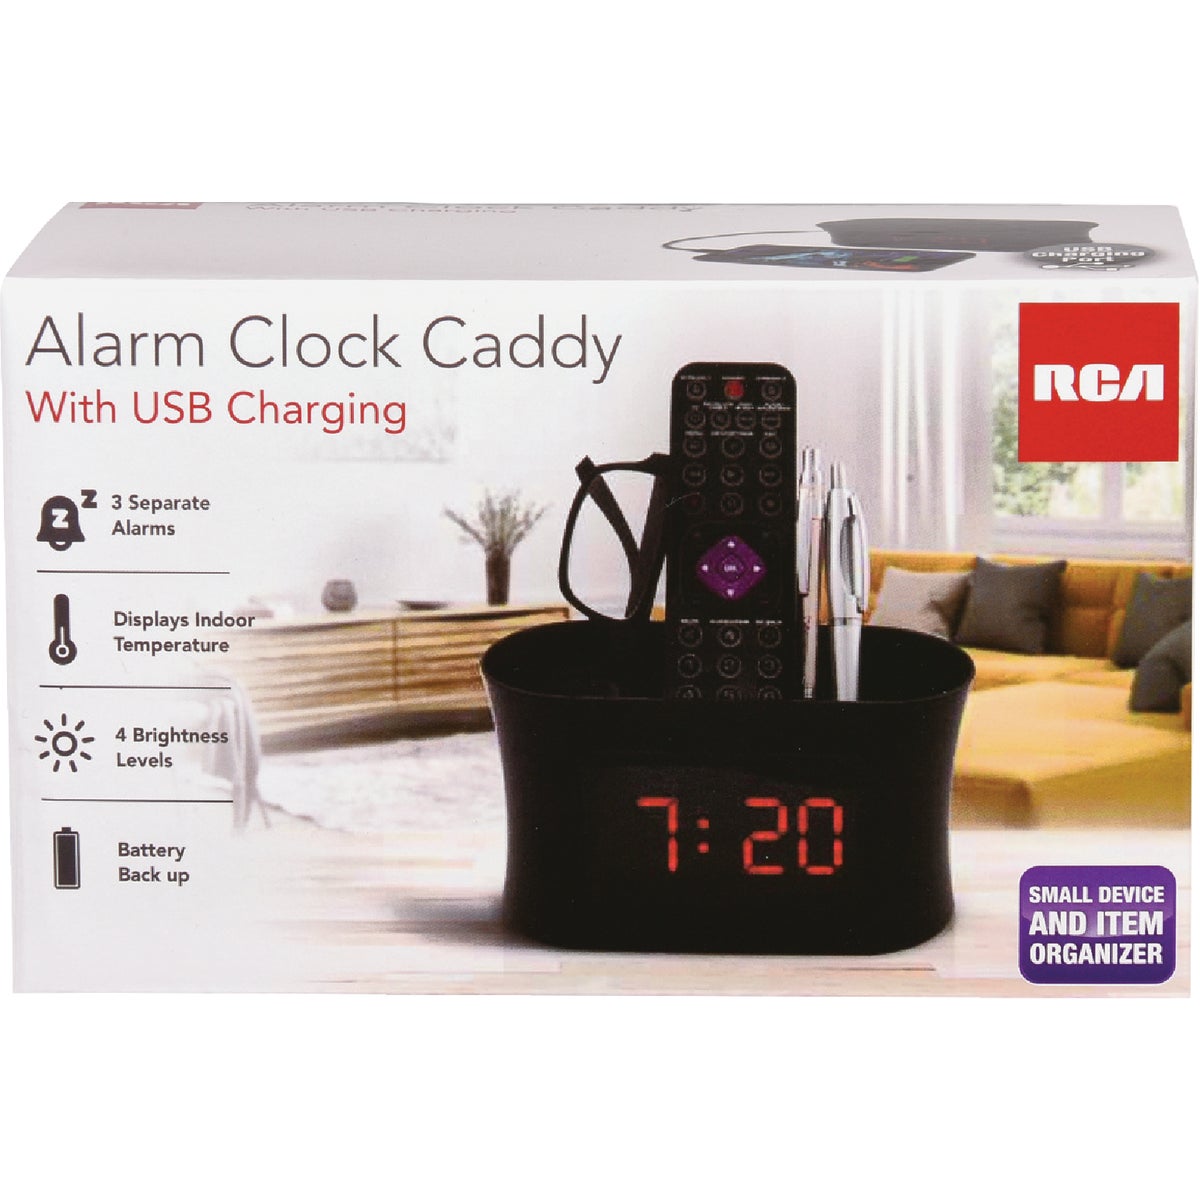 Item 600810, Stay organized with the simple and easy-to-use RCA alarm clock storage 